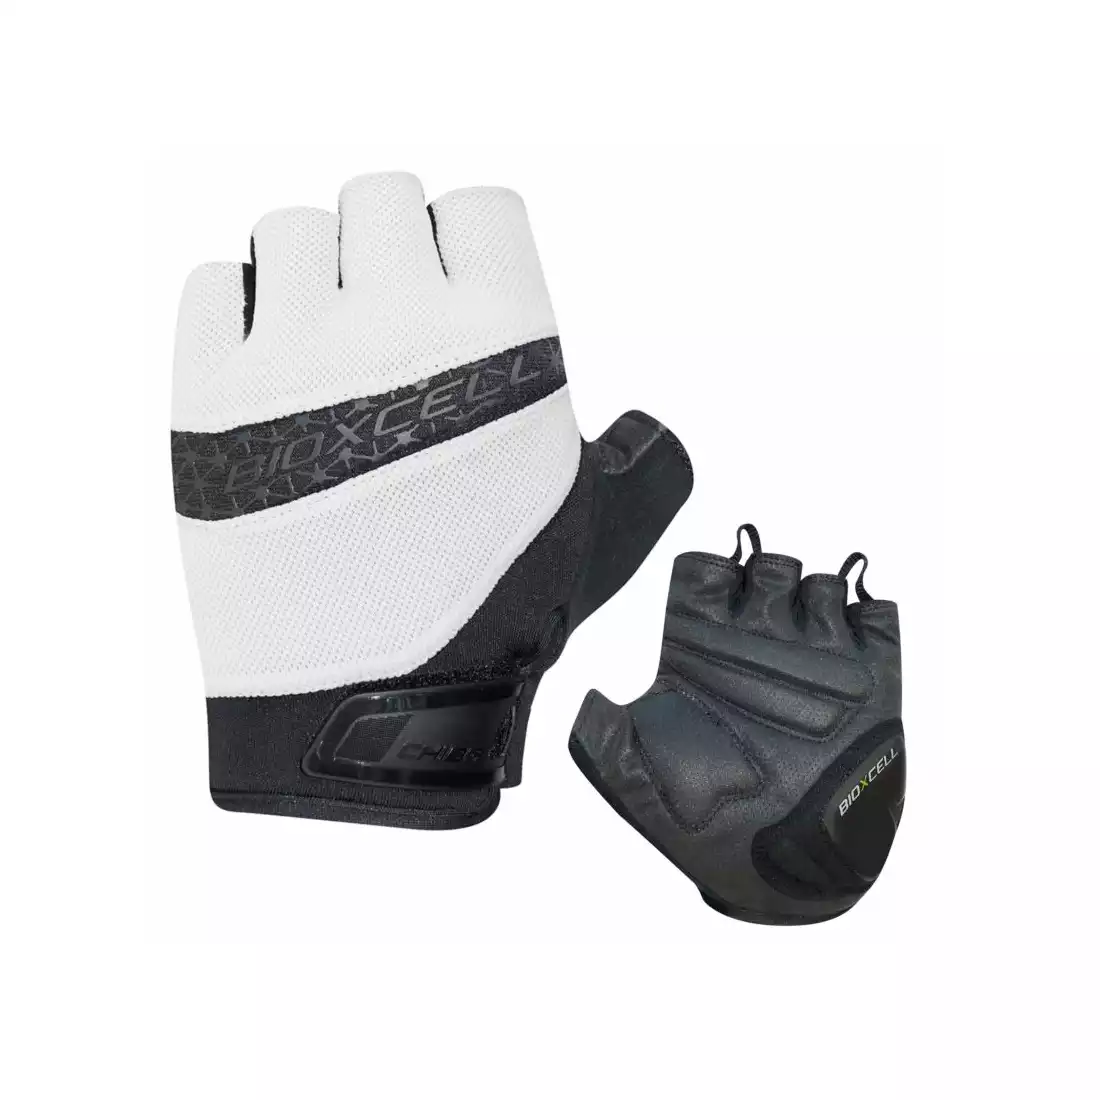 CHIBA BIOXCELL PRO cycling gloves, White